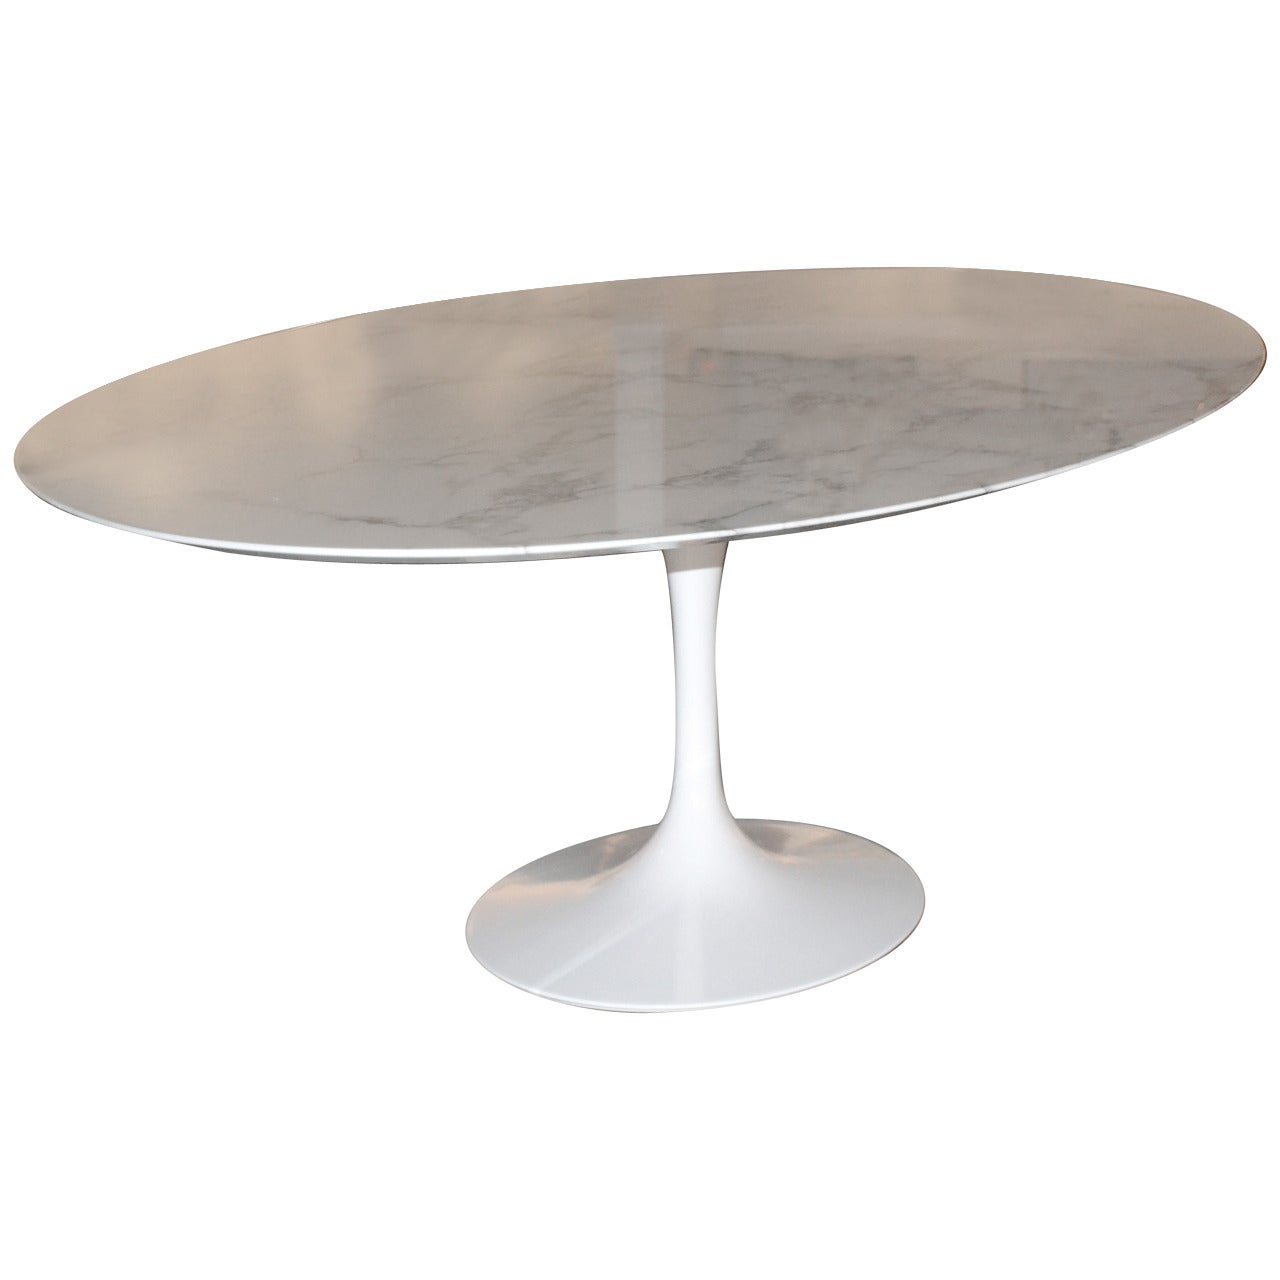 Saarinen Tulip Oval Dining or Conference Table with Marble Top